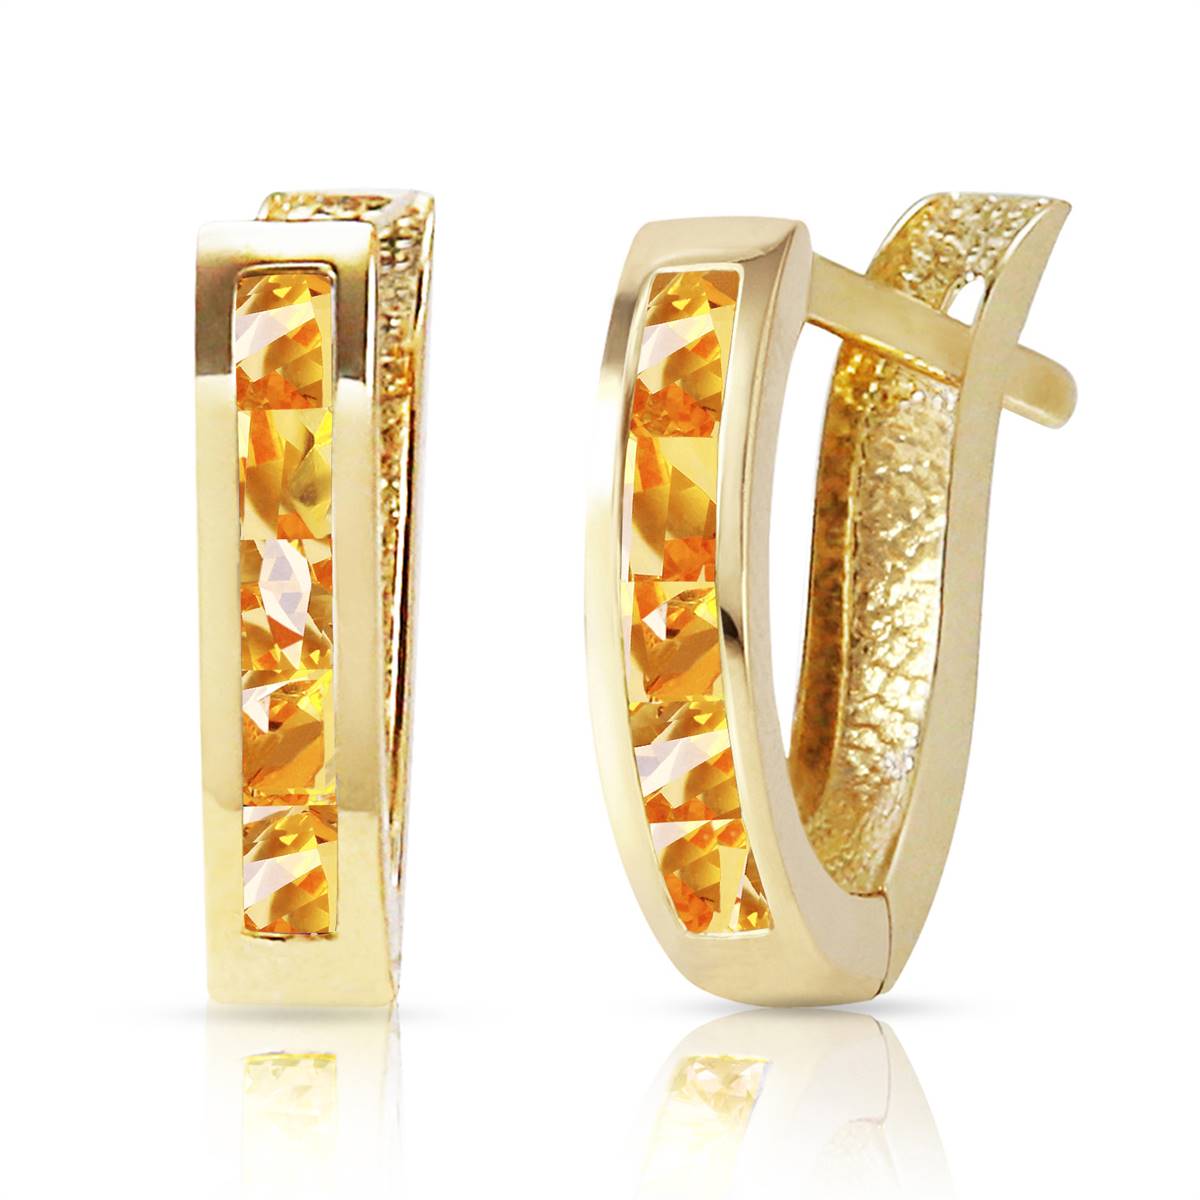 0.7 Carat 14K Solid Yellow Gold Oval Huggie Earrings Citrine